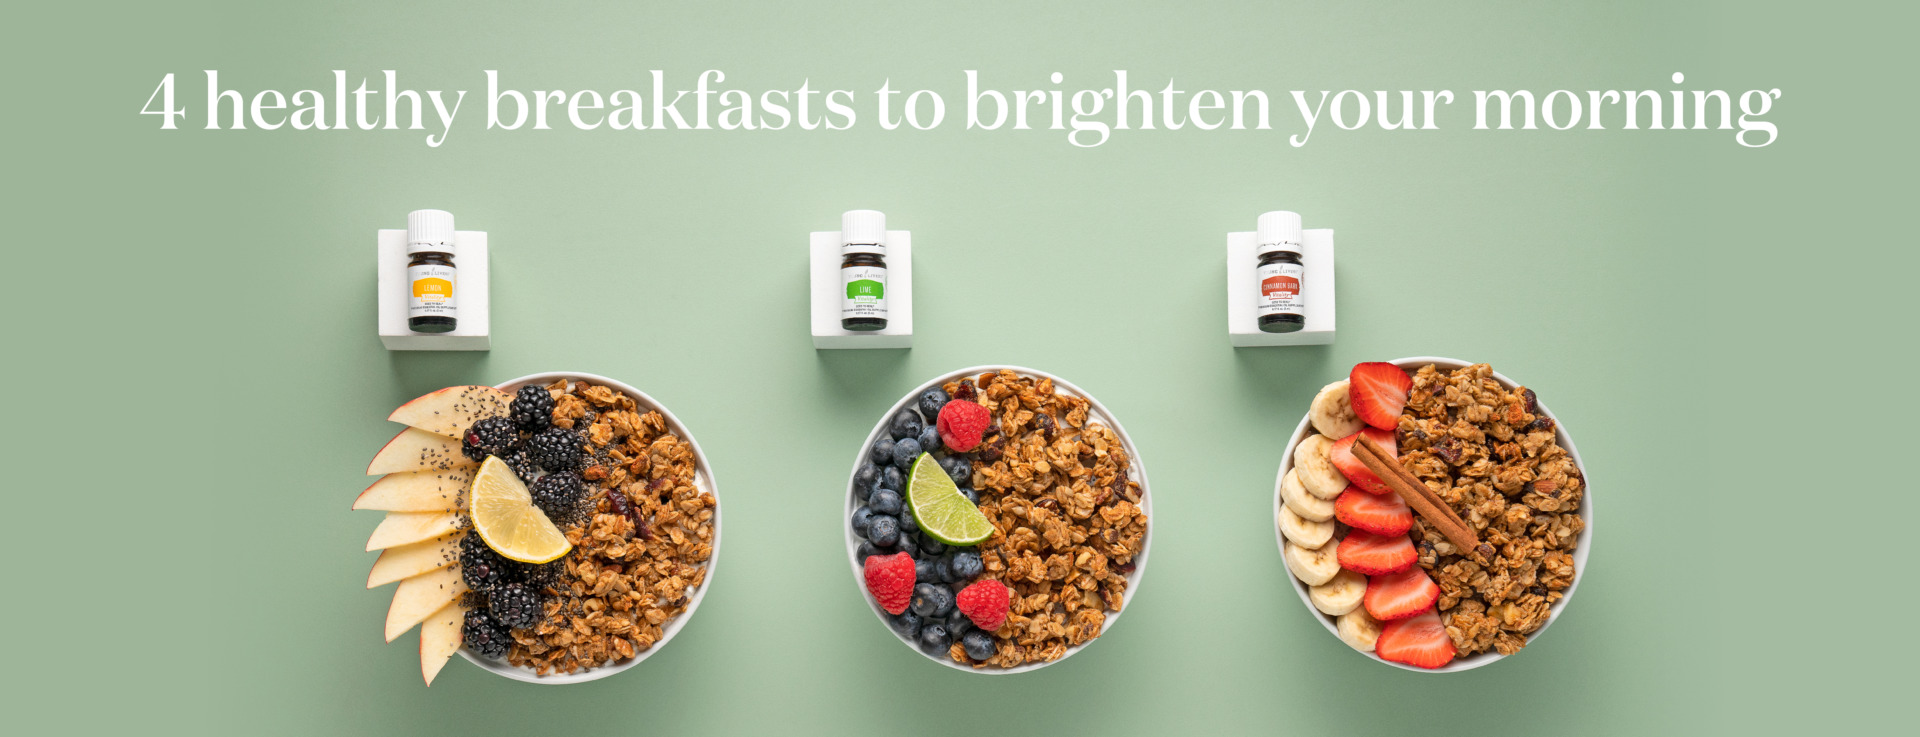 4 healthy breakfasts to brighten your morning